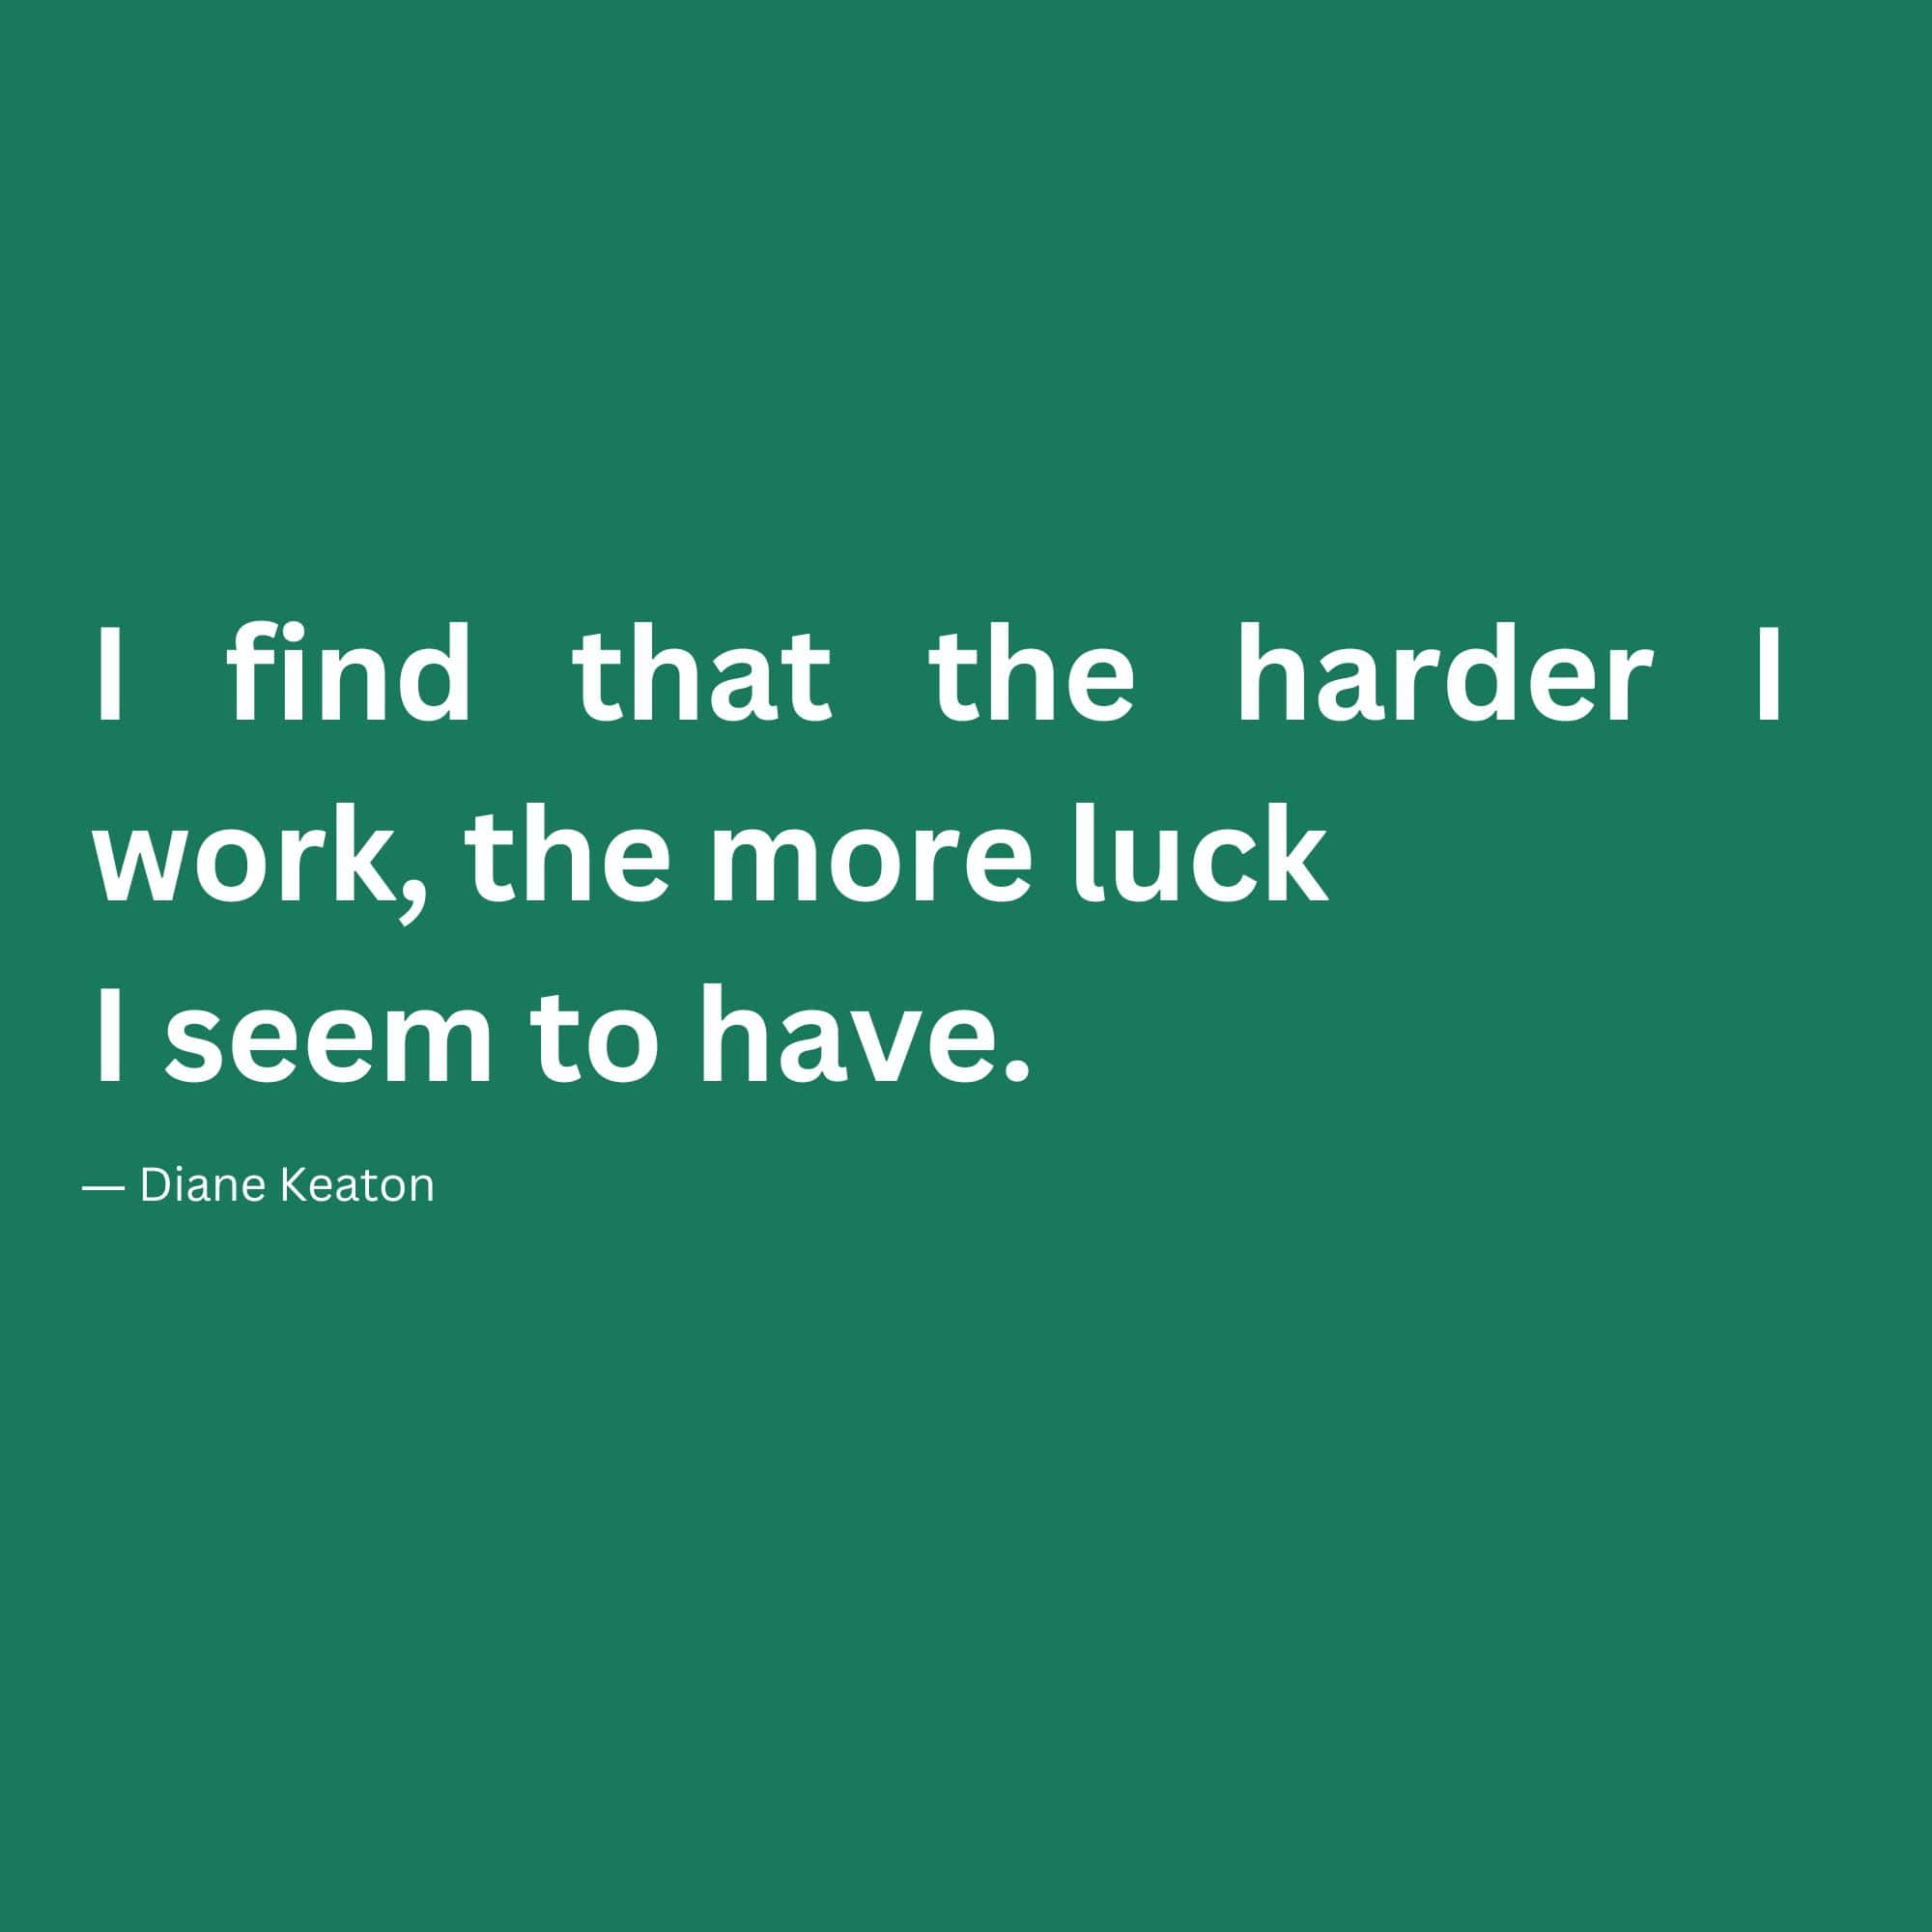 "I find that the harder I work, the more luck I seem to have." -- Diane Keaton